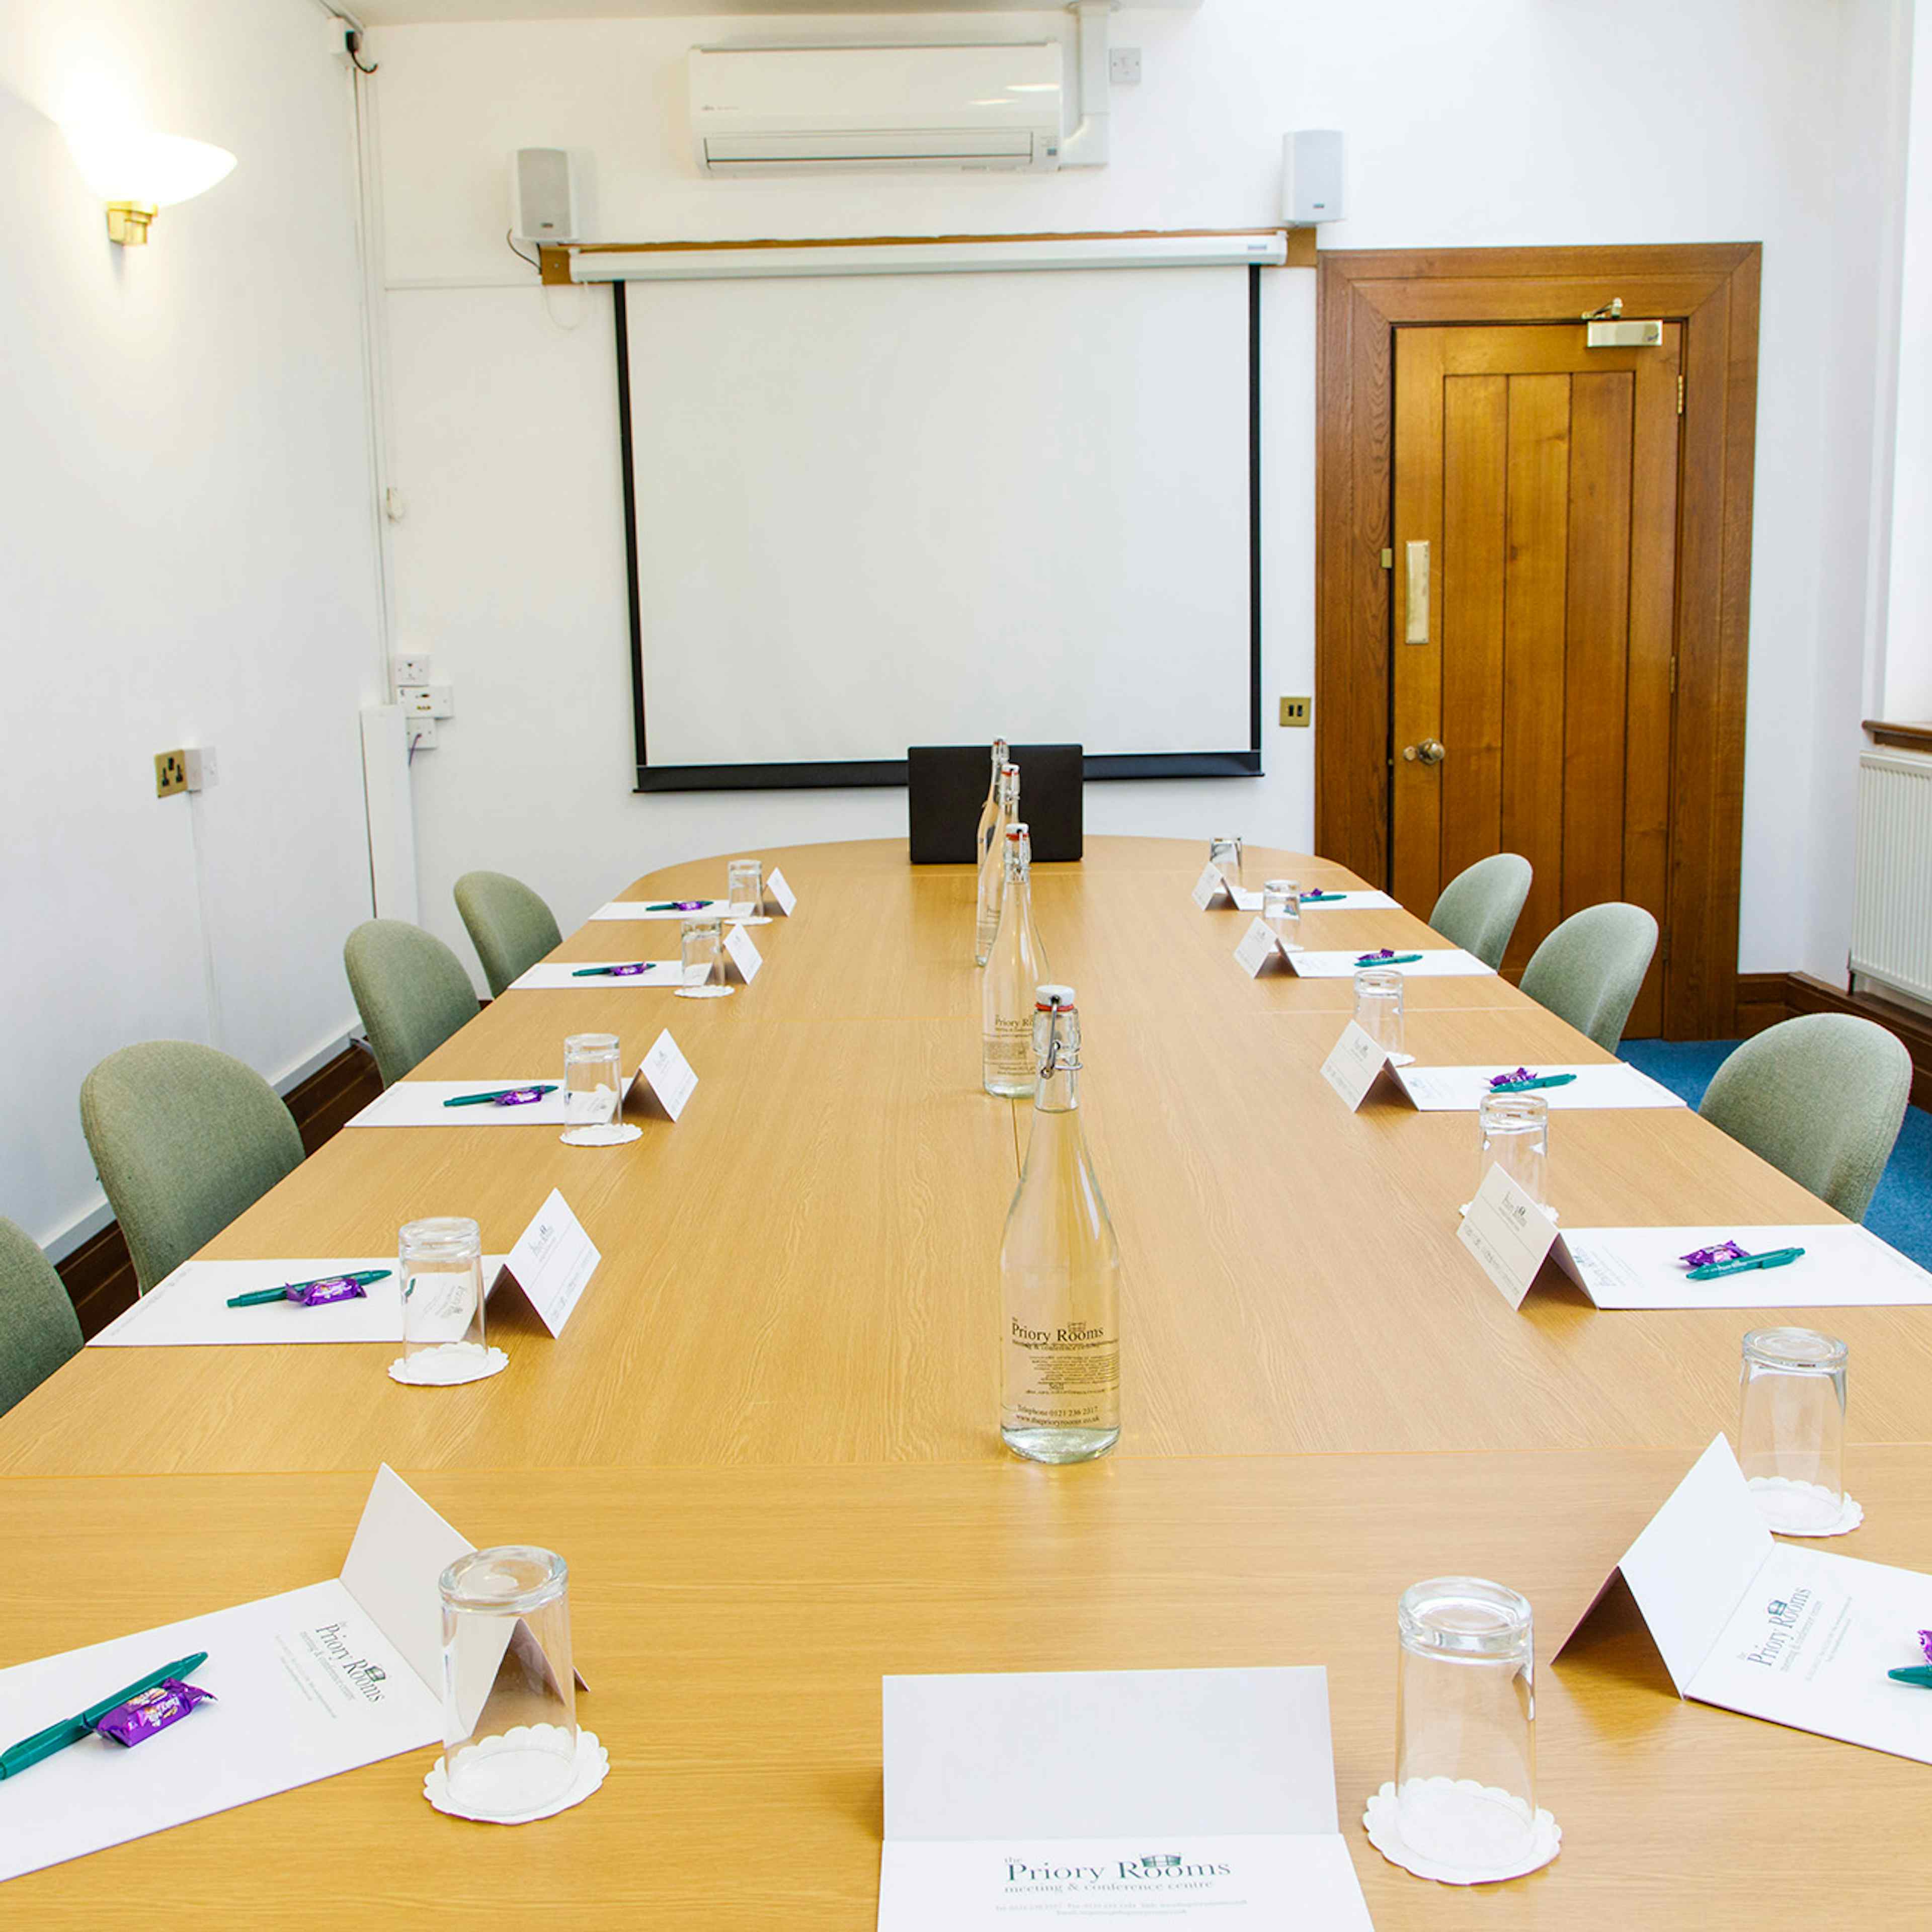 The Priory Rooms Meeting and Conference Centre  - Sturge room image 2